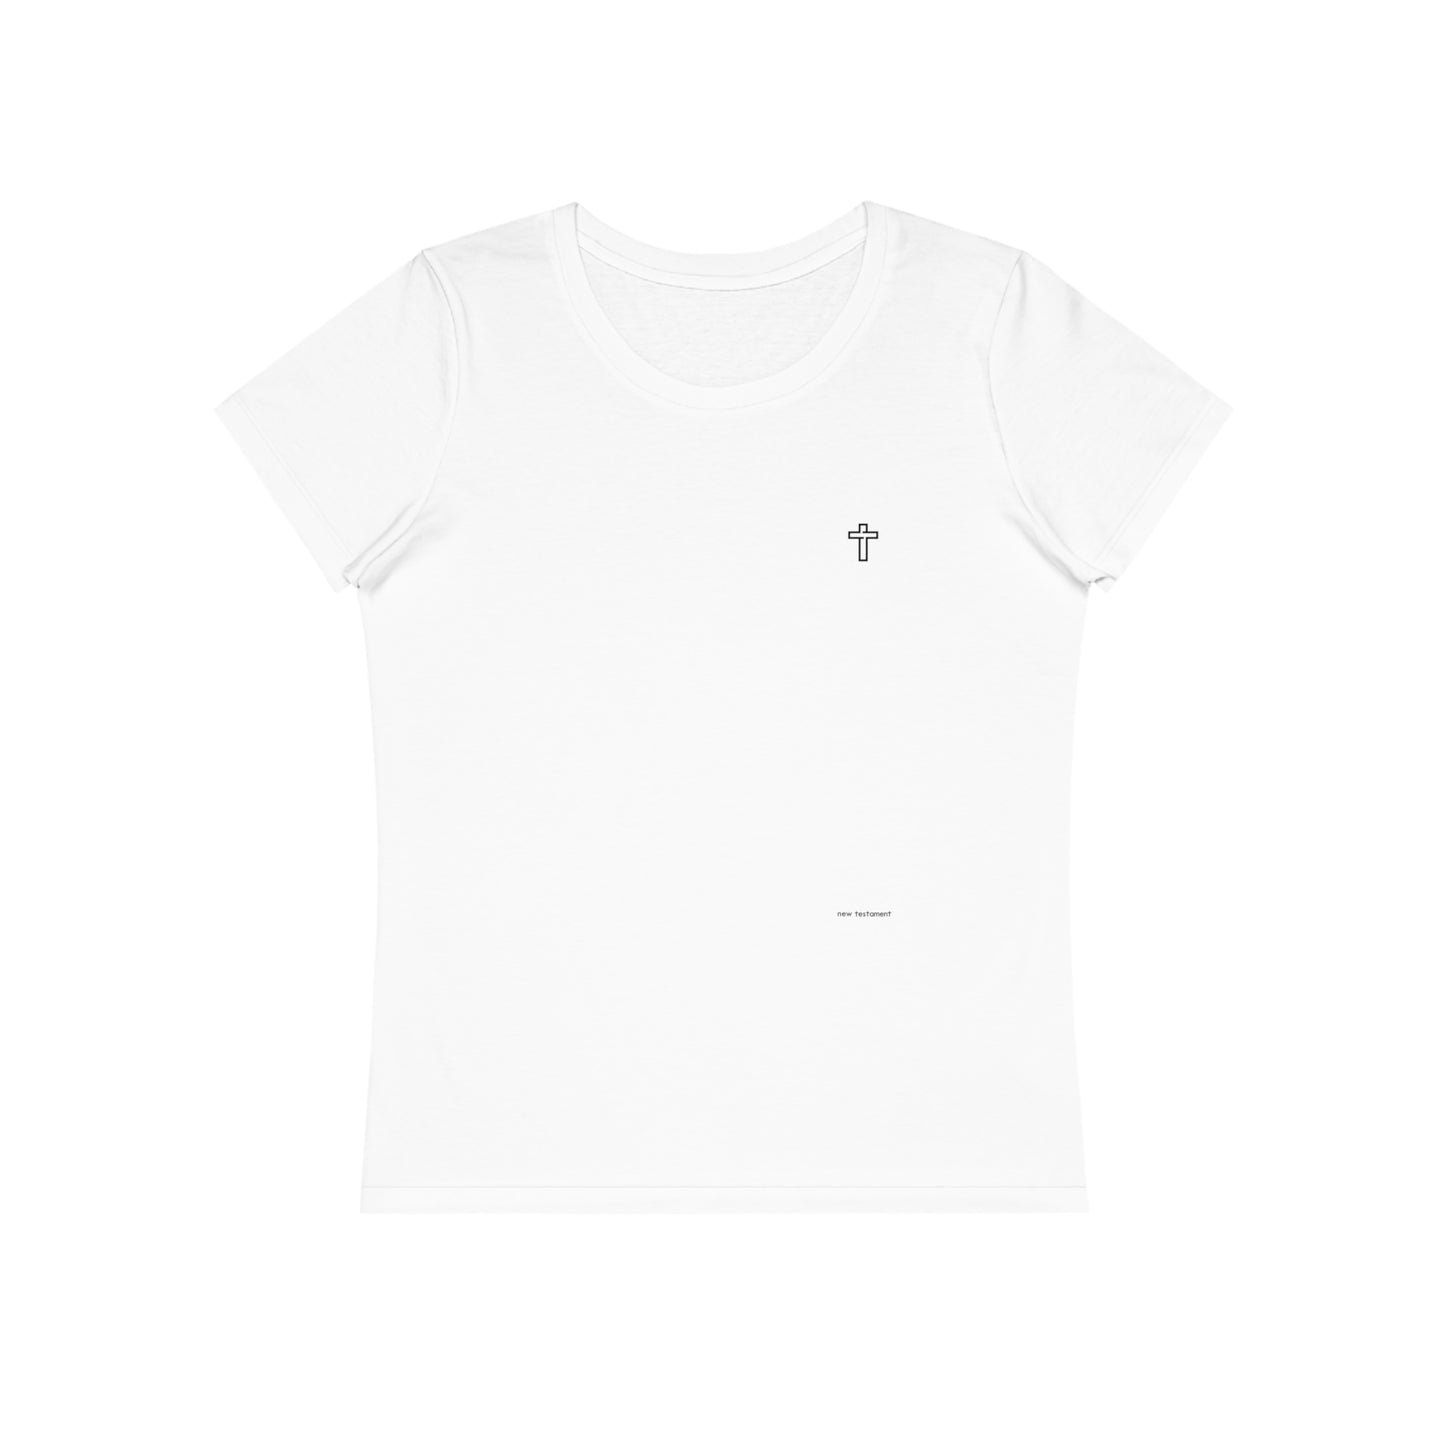 Logo's Women's Fitted T